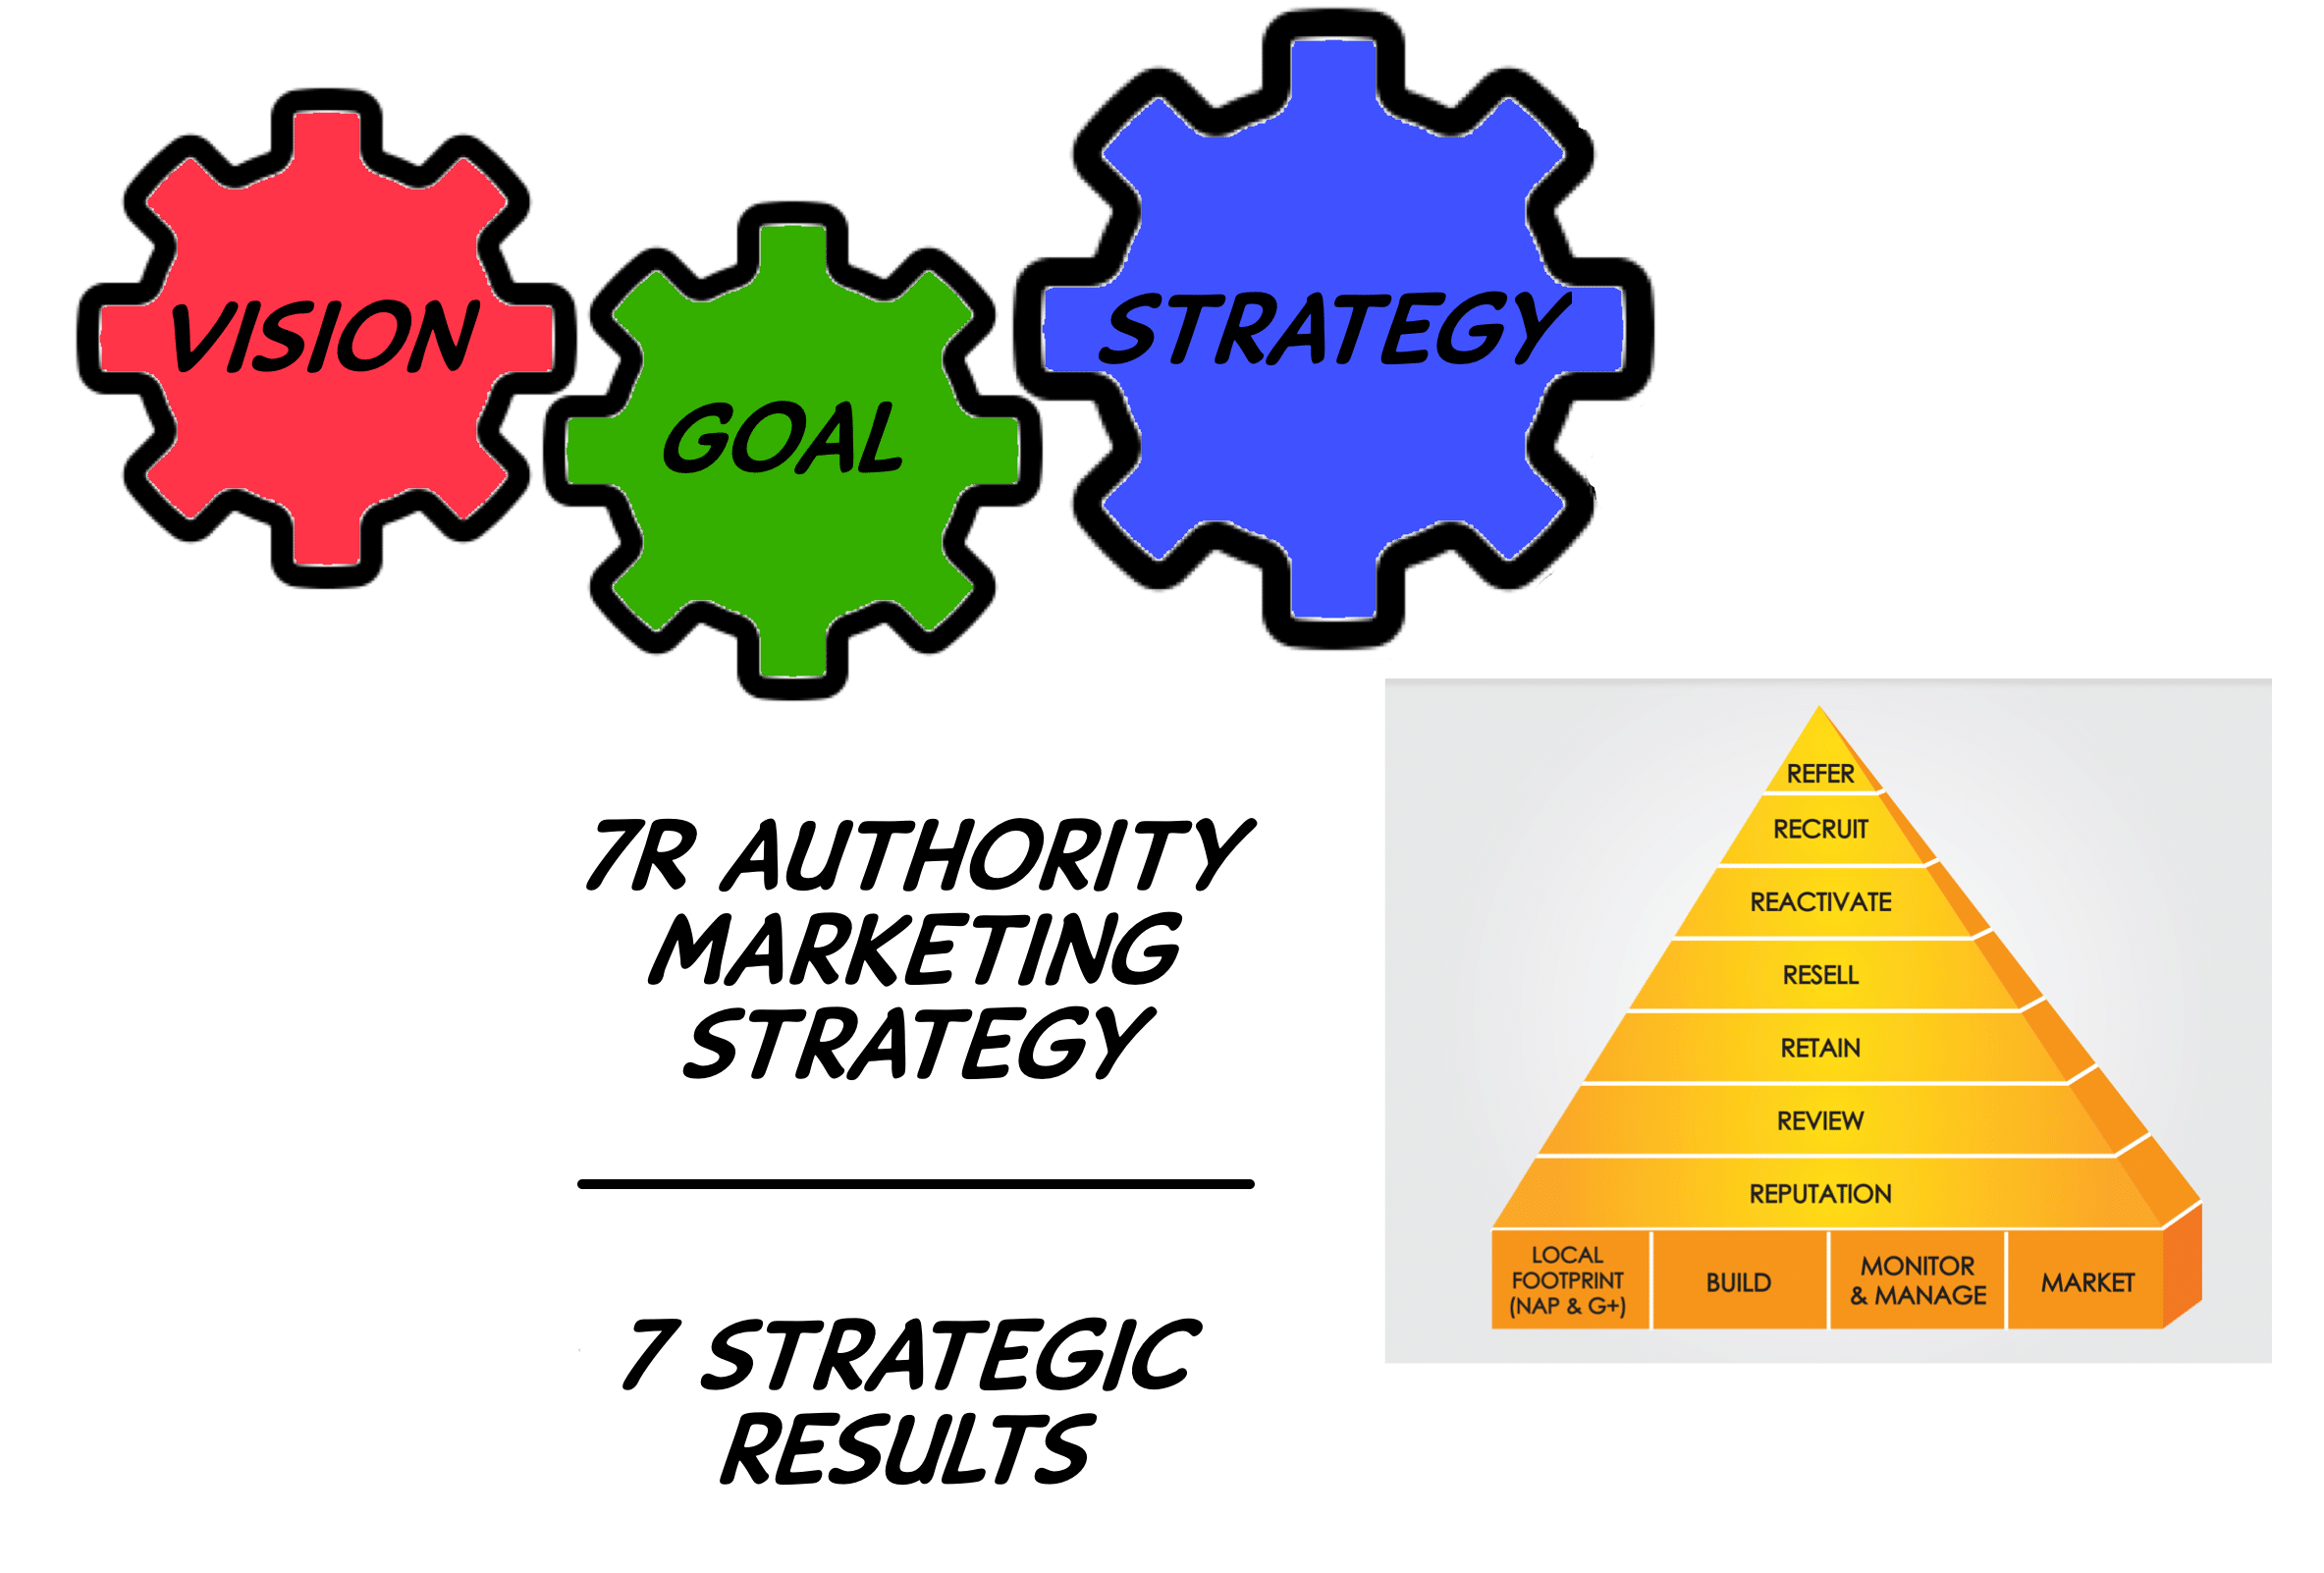 Strategy The 7R Authority Marketing Strategy